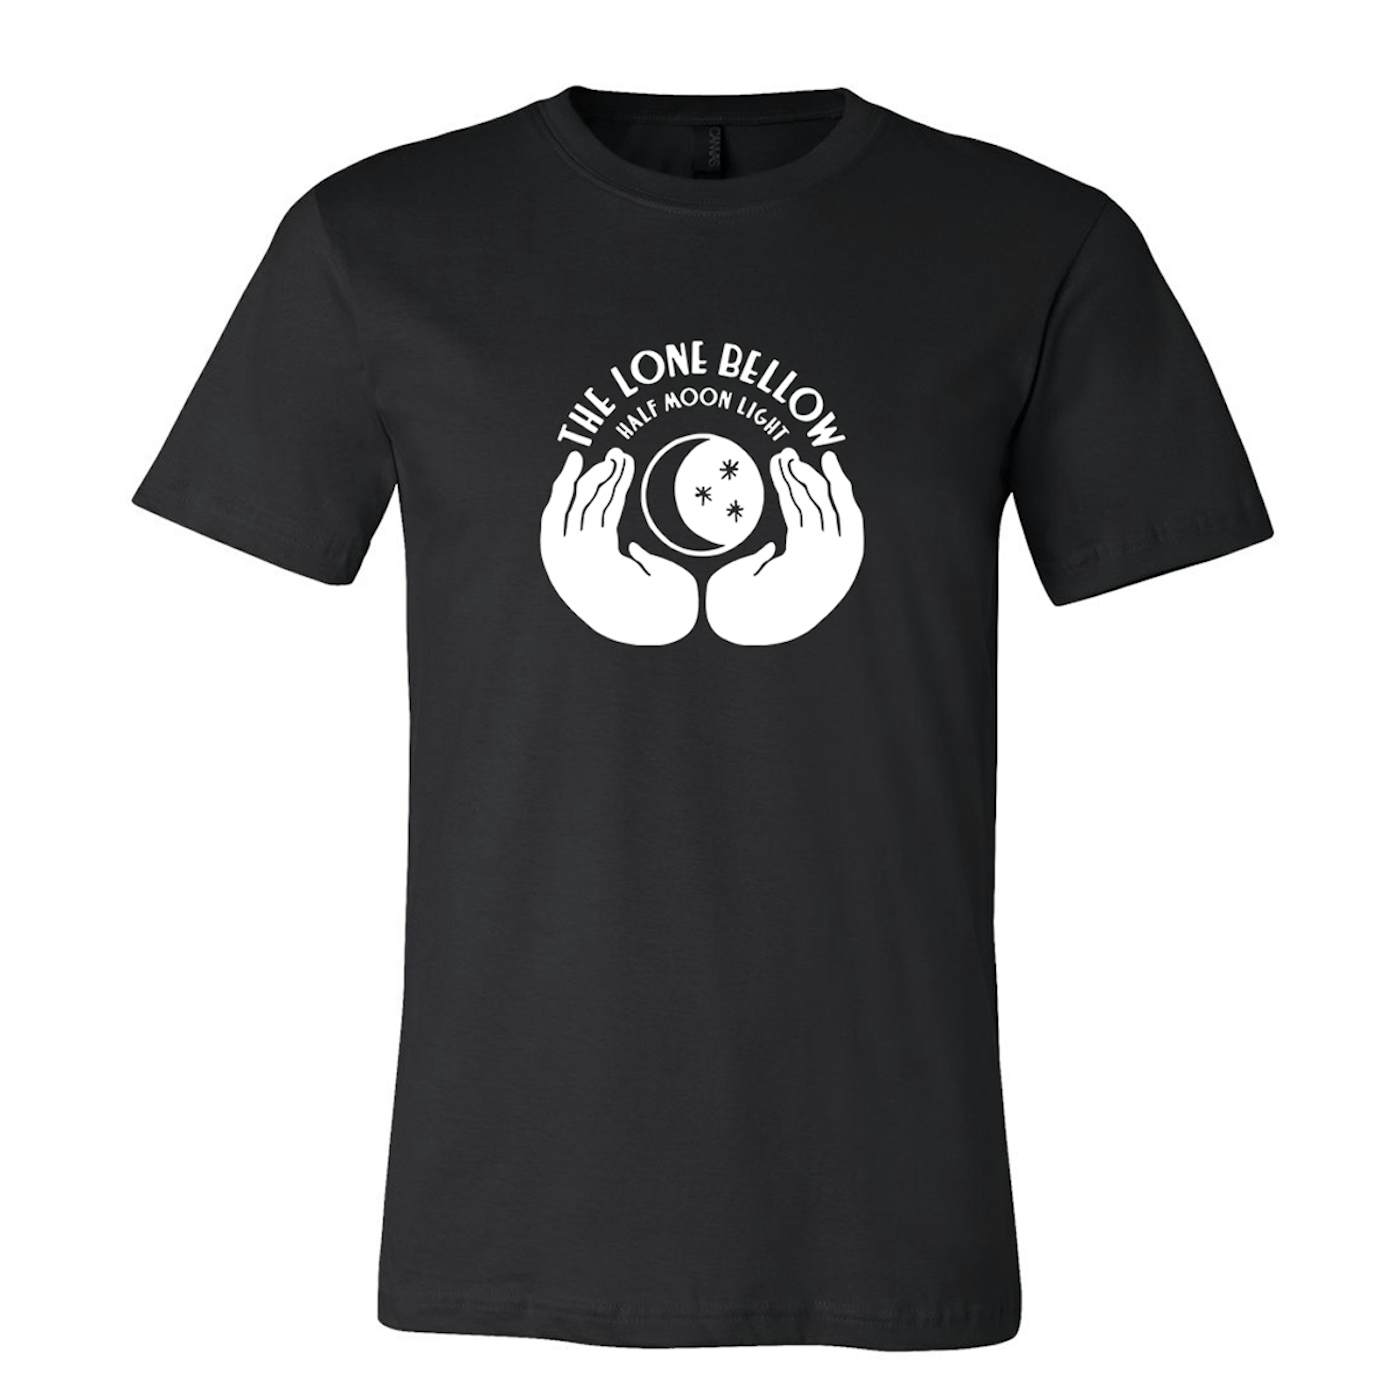 The Lone Bellow Hands Tee